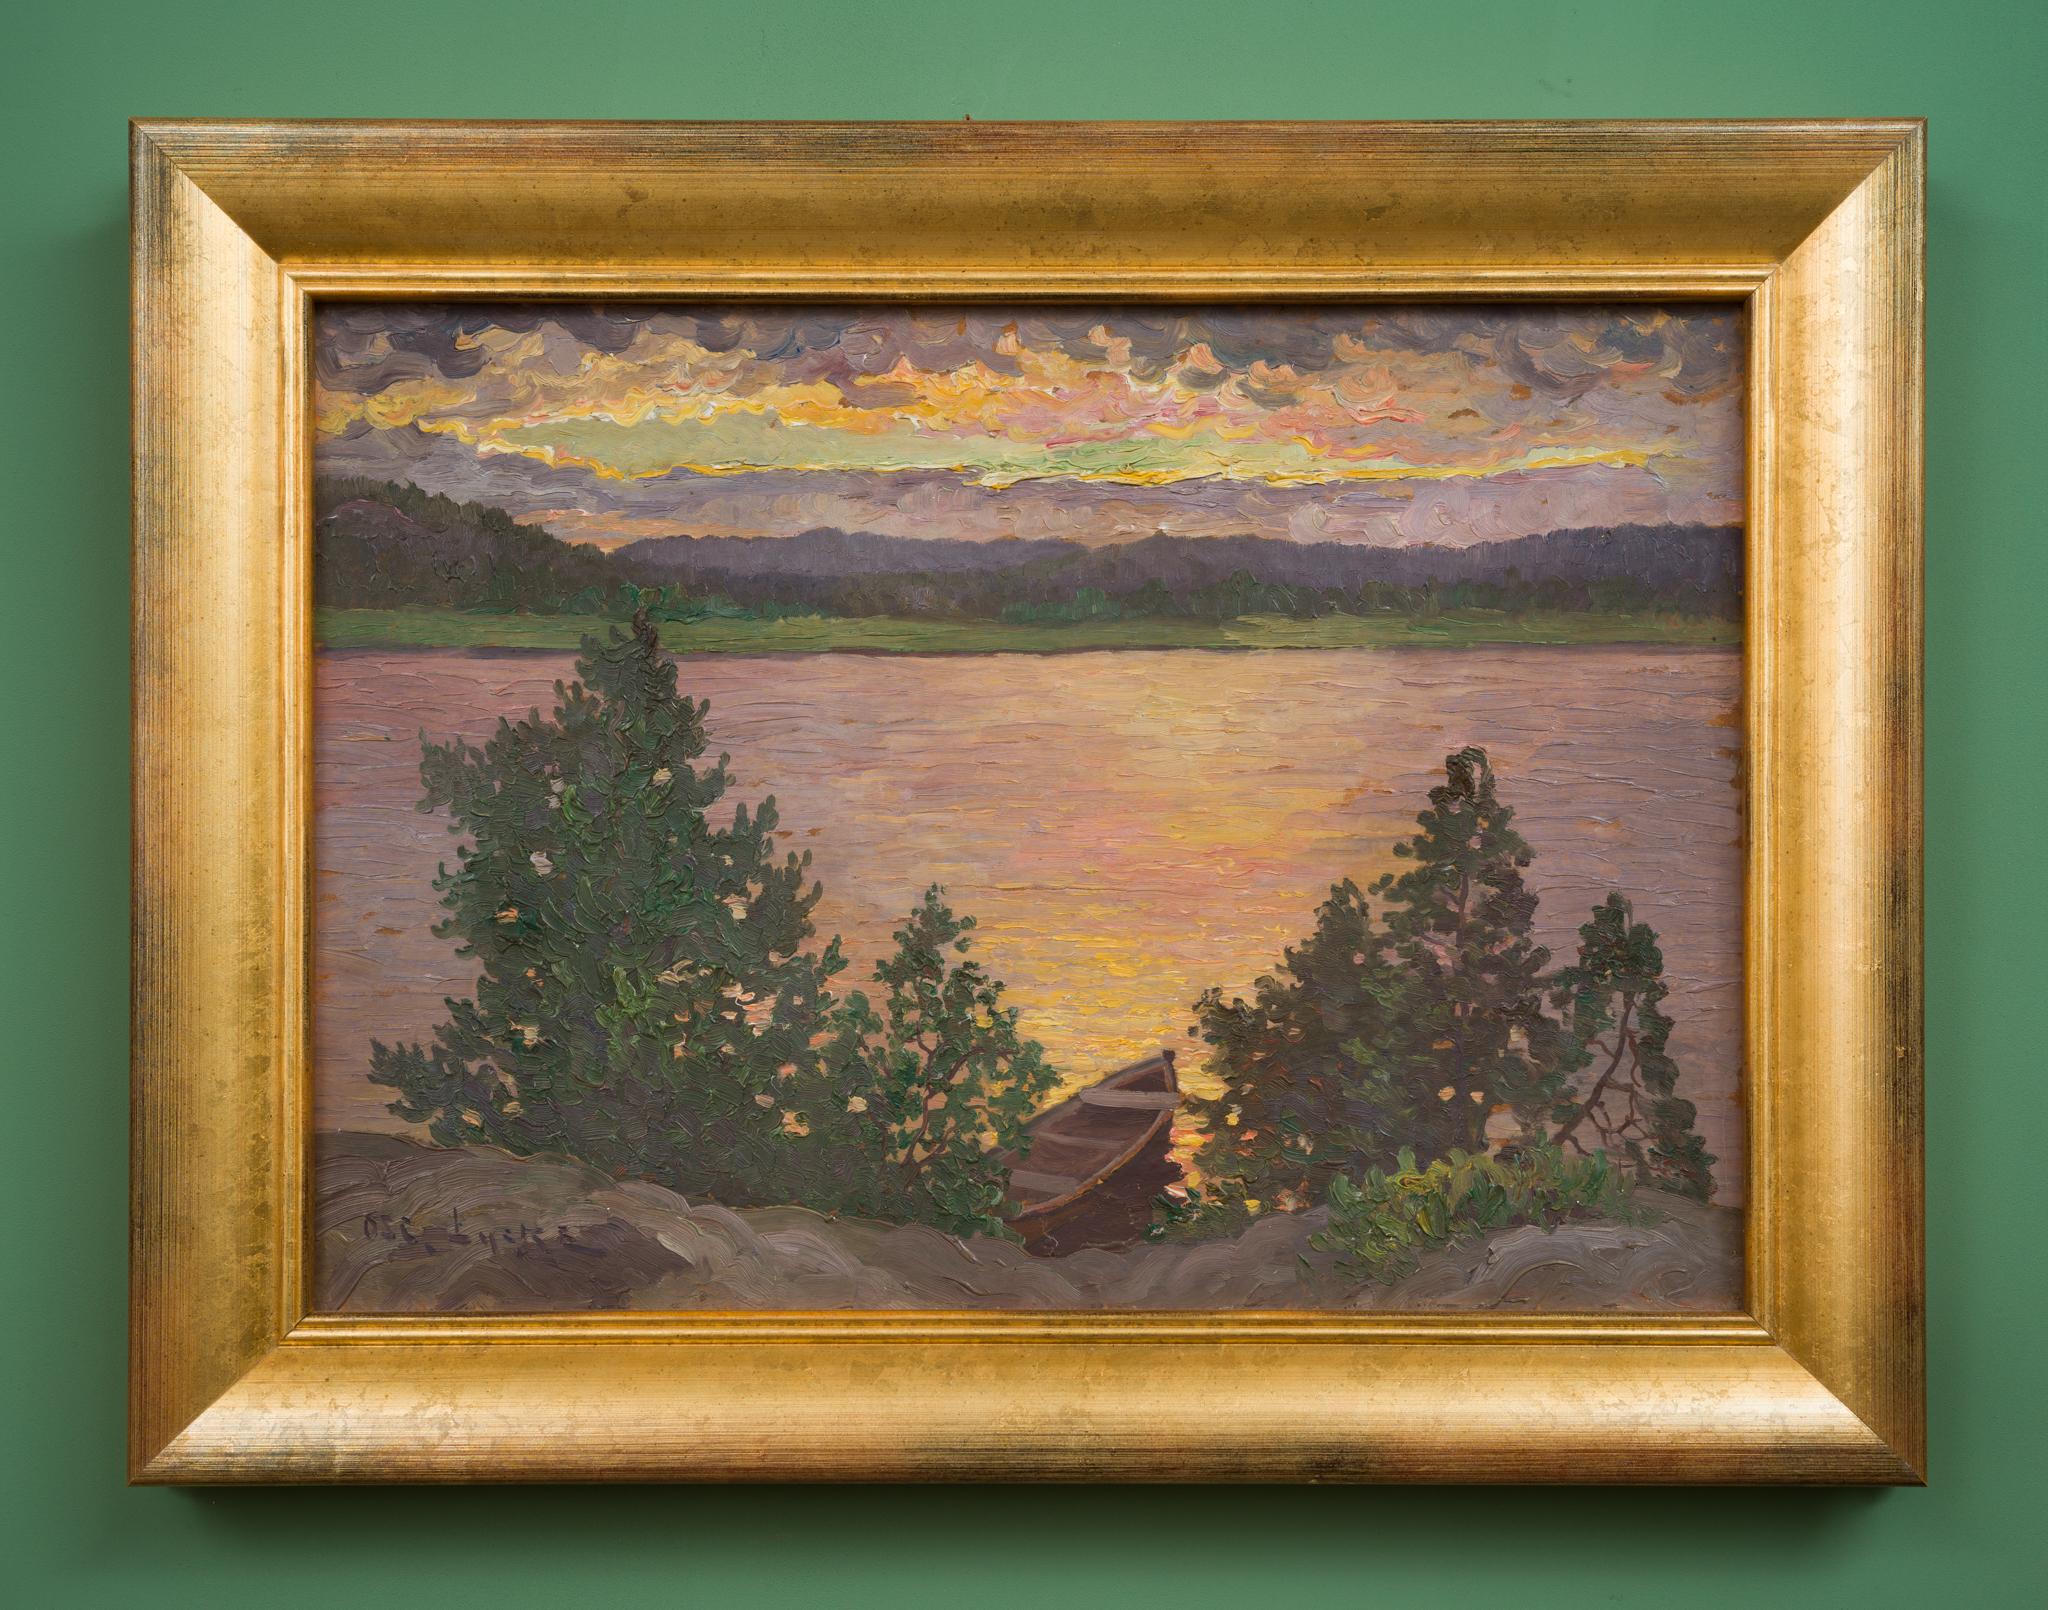 This exquisite landscape painting by Oscar Lycke, a notable artist from Sundsvall who flourished around the turn of the 20th century, captures the serene beauty of a lake at sunset. The scene is delicately composed with a boat (Swedish 